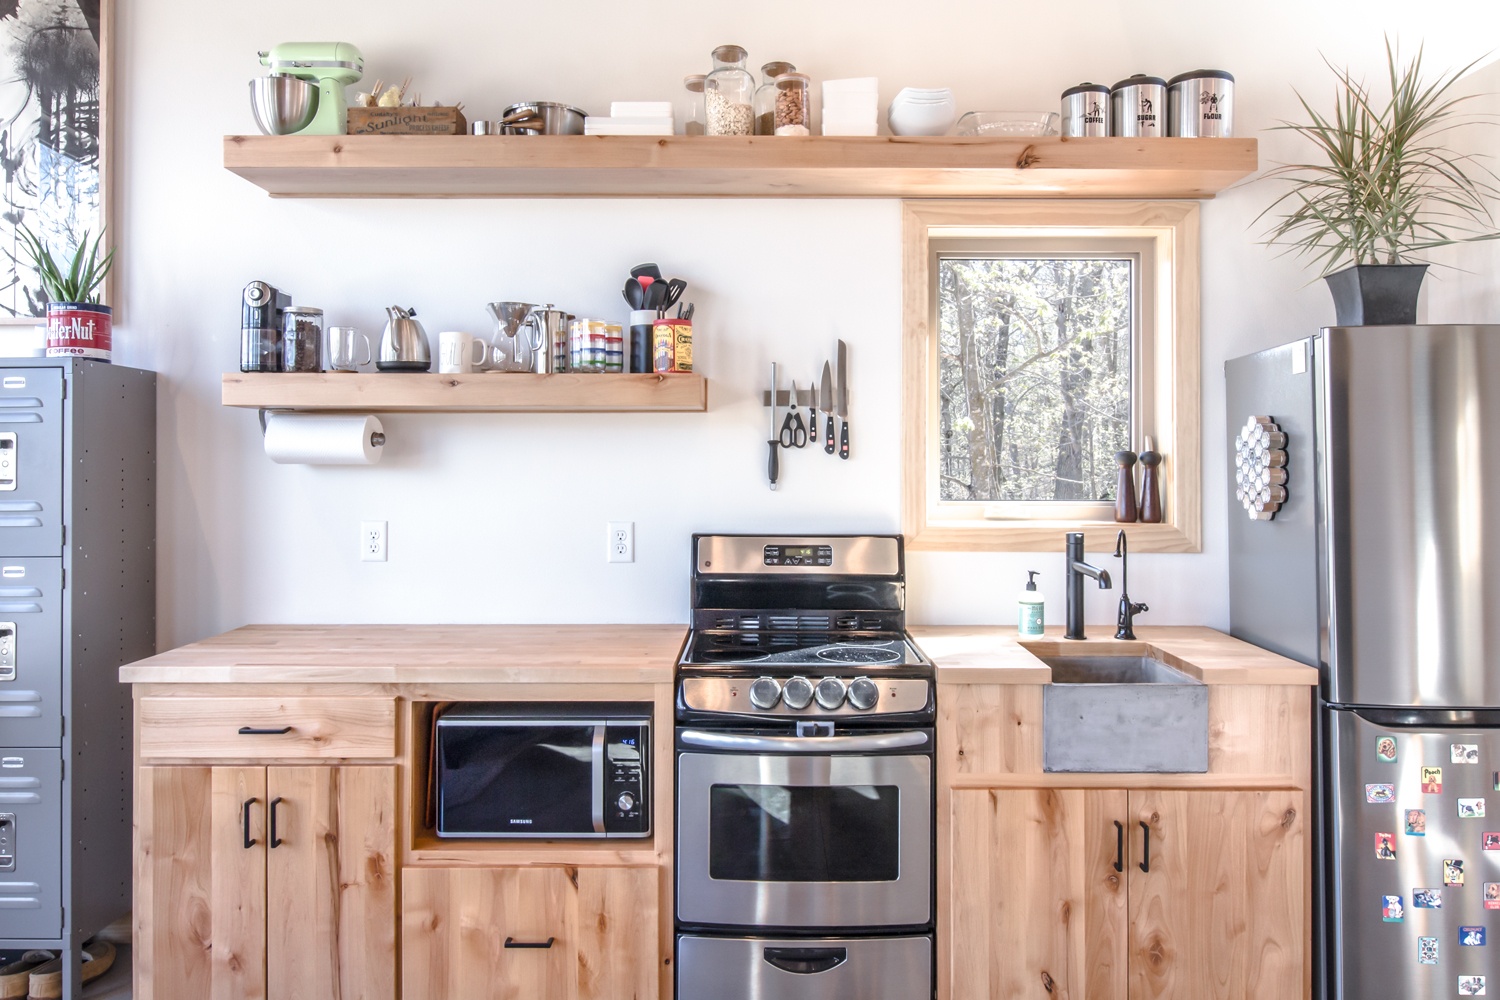 20 Tips for Making the Most of Your Small Kitchen Design